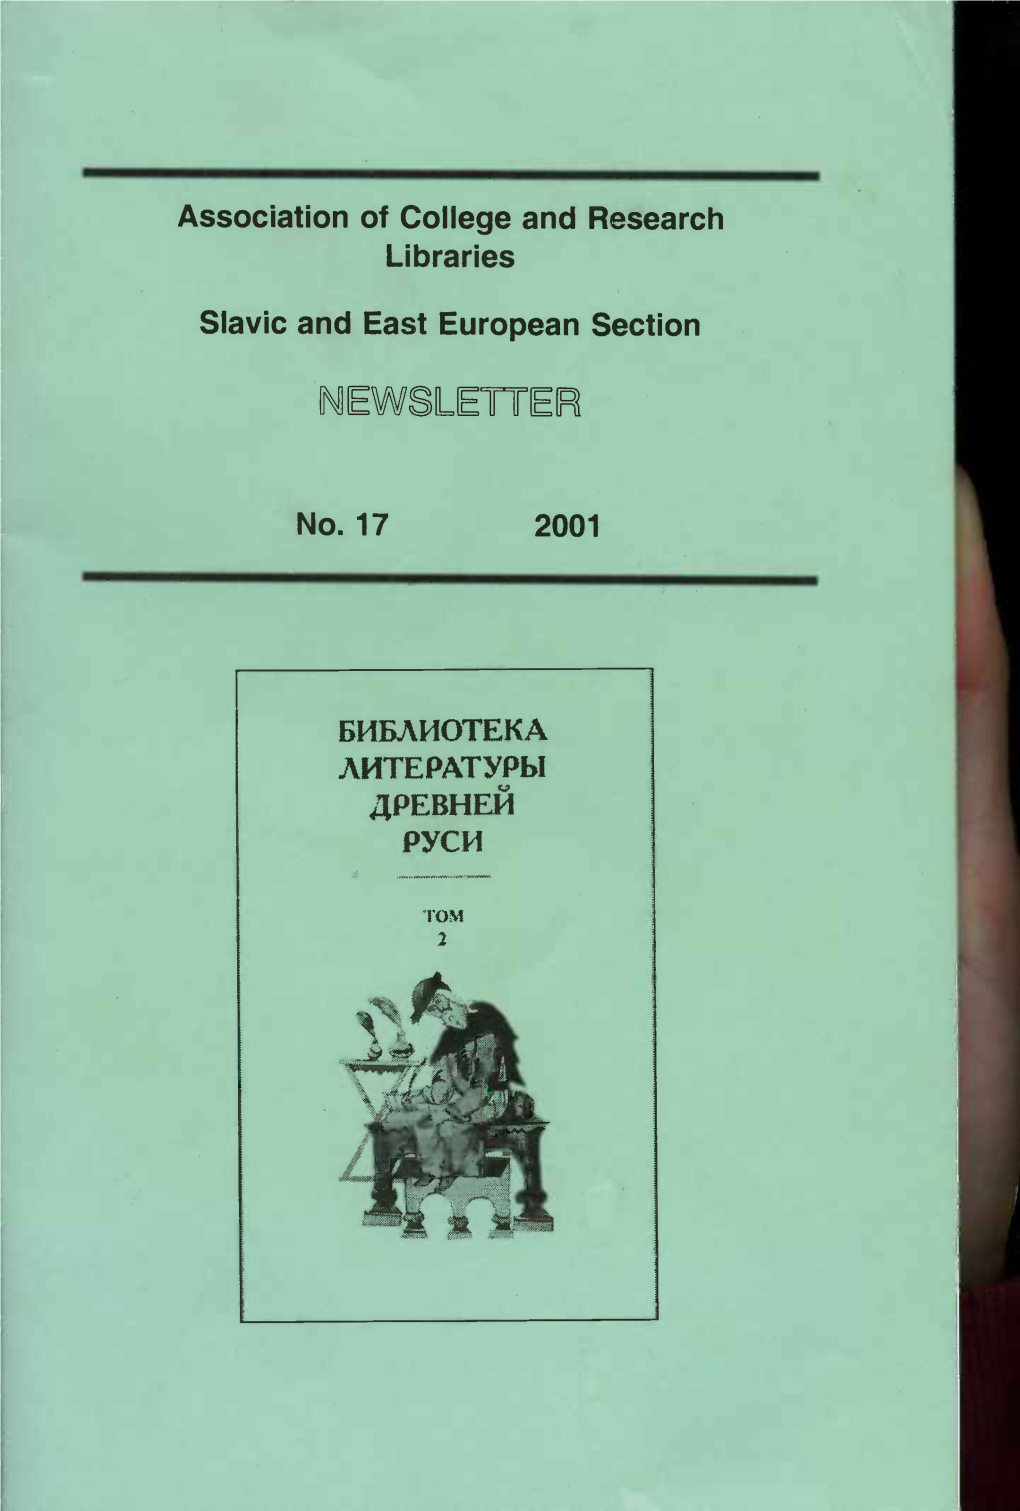 Slavic and East European Section